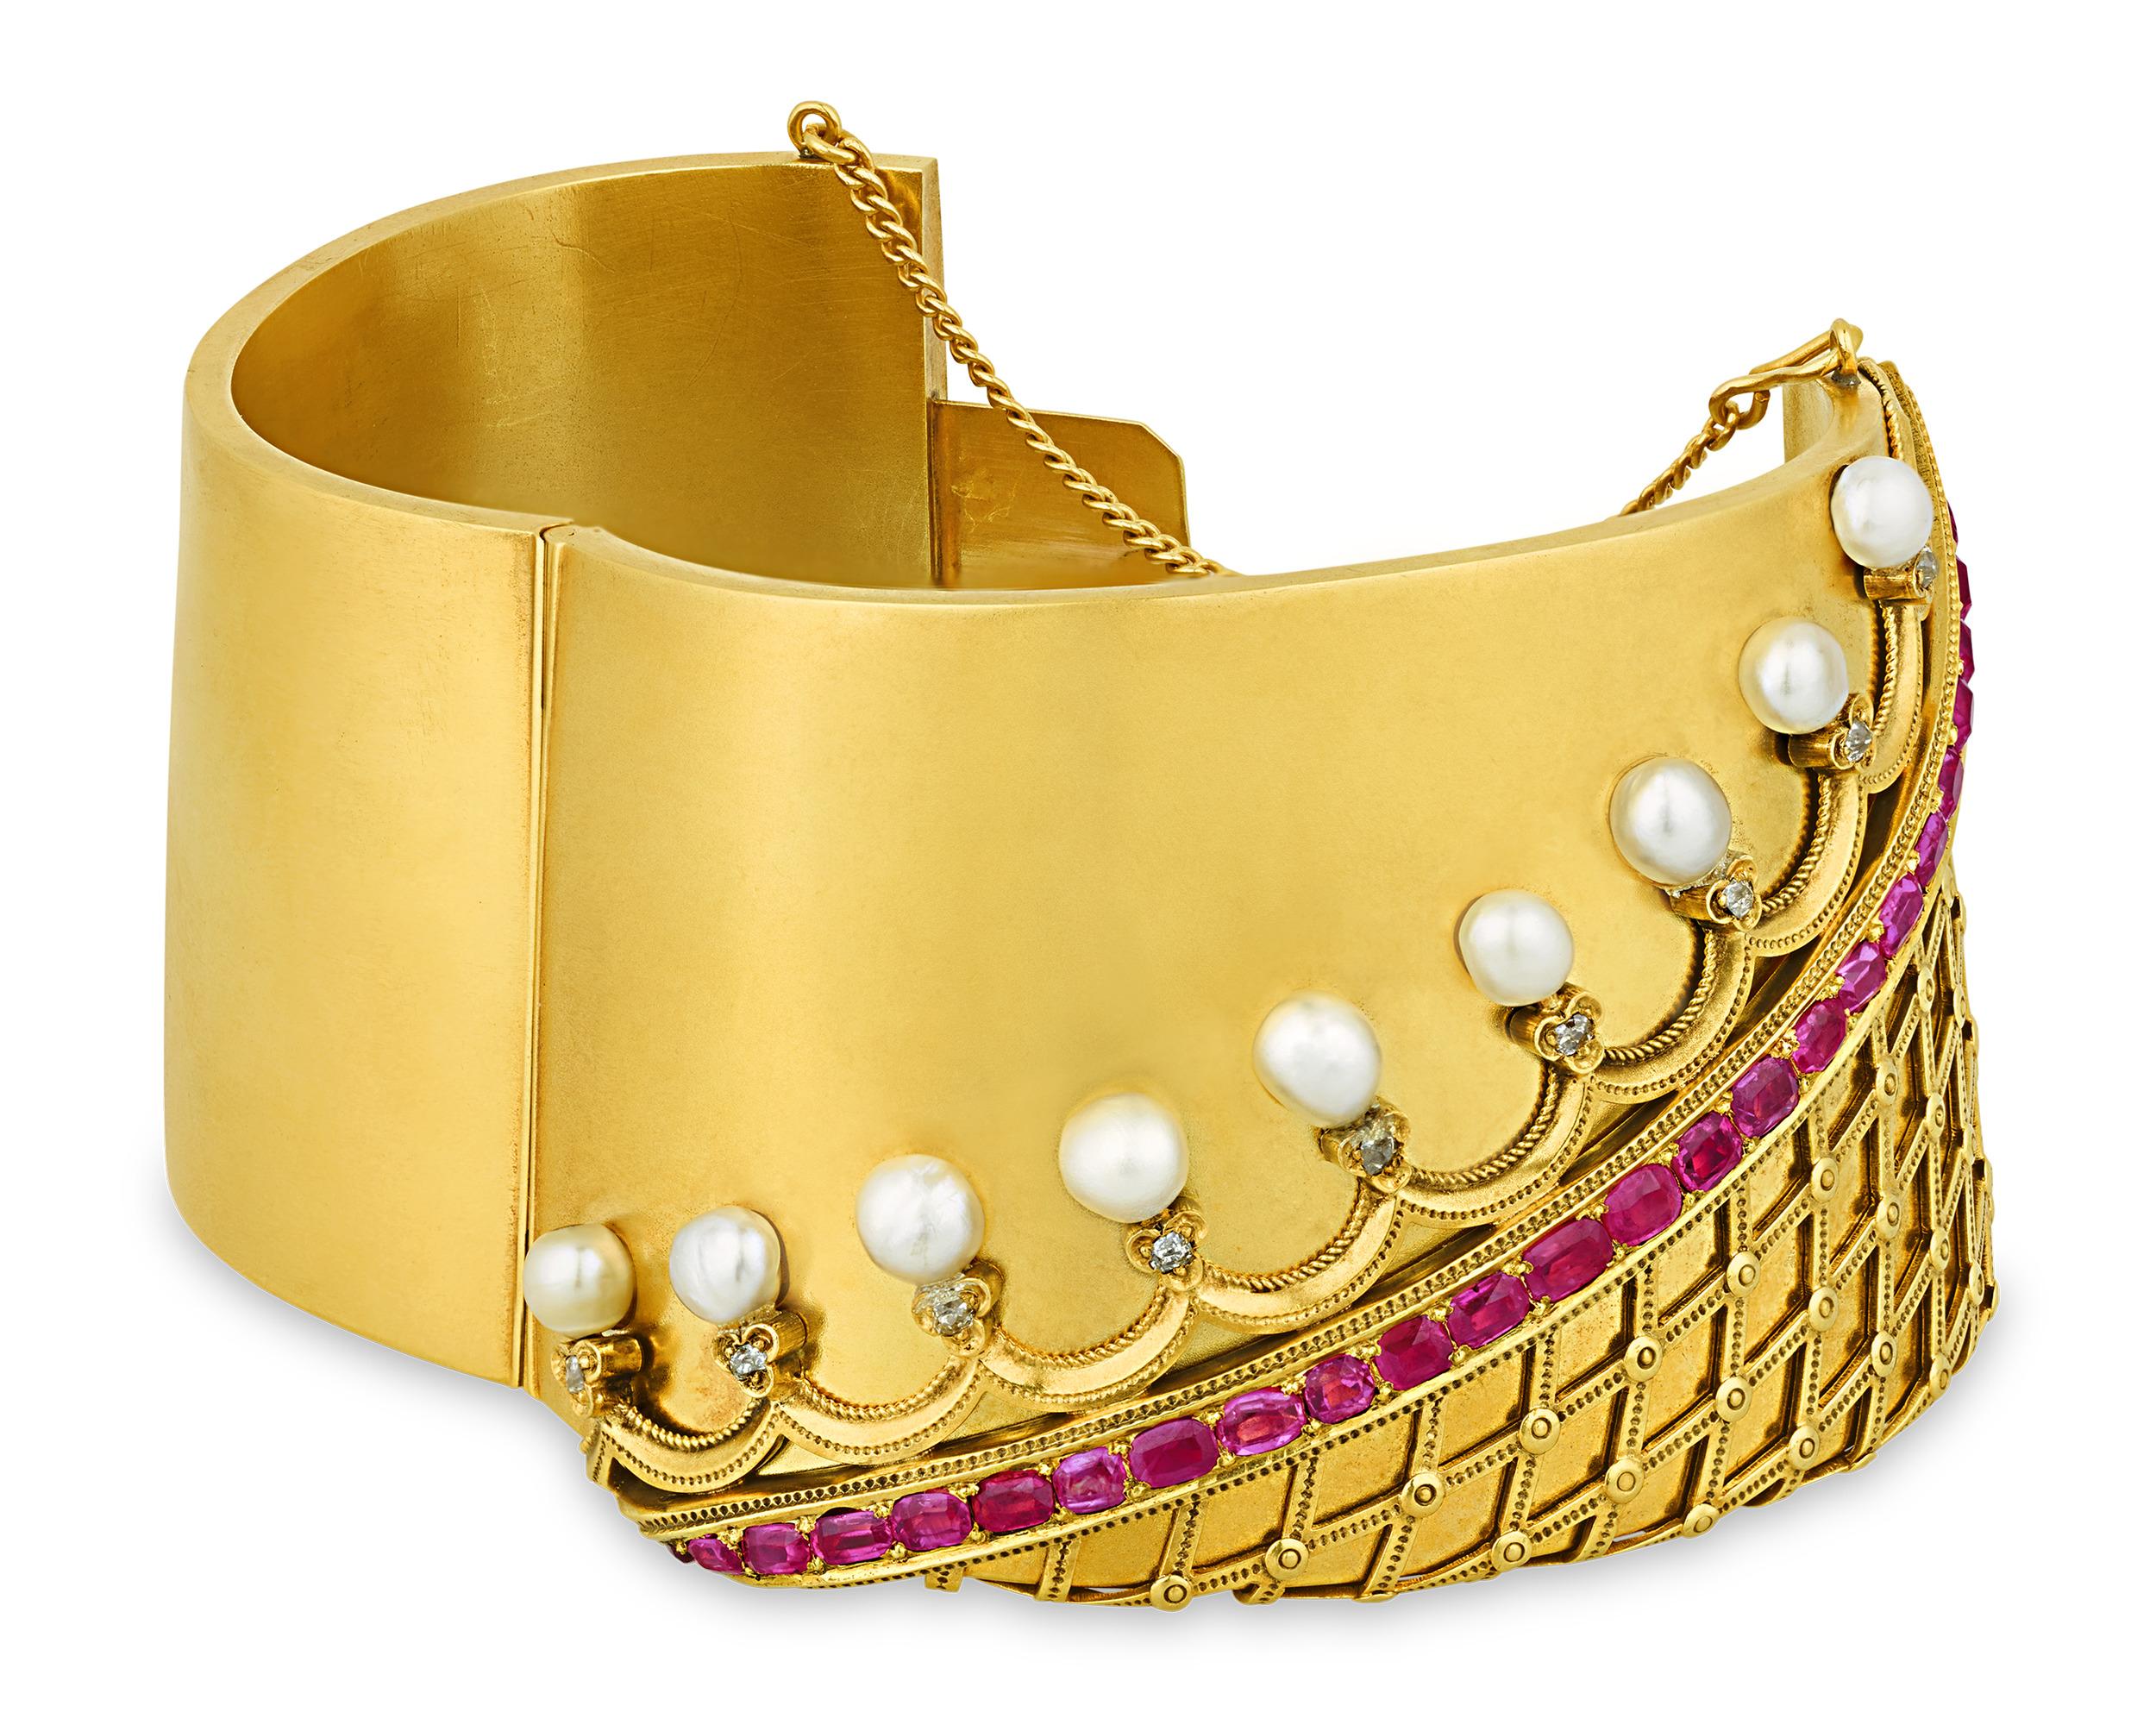 This pearl and ruby cuff bracelet epitomizes classic refinement. The 14K Gold bracelet resembles the embroidered cuff of a Victorian-era gown, complete with a trim elevated by lustrous natural pearls and sparkling diamonds. The cross-hatching